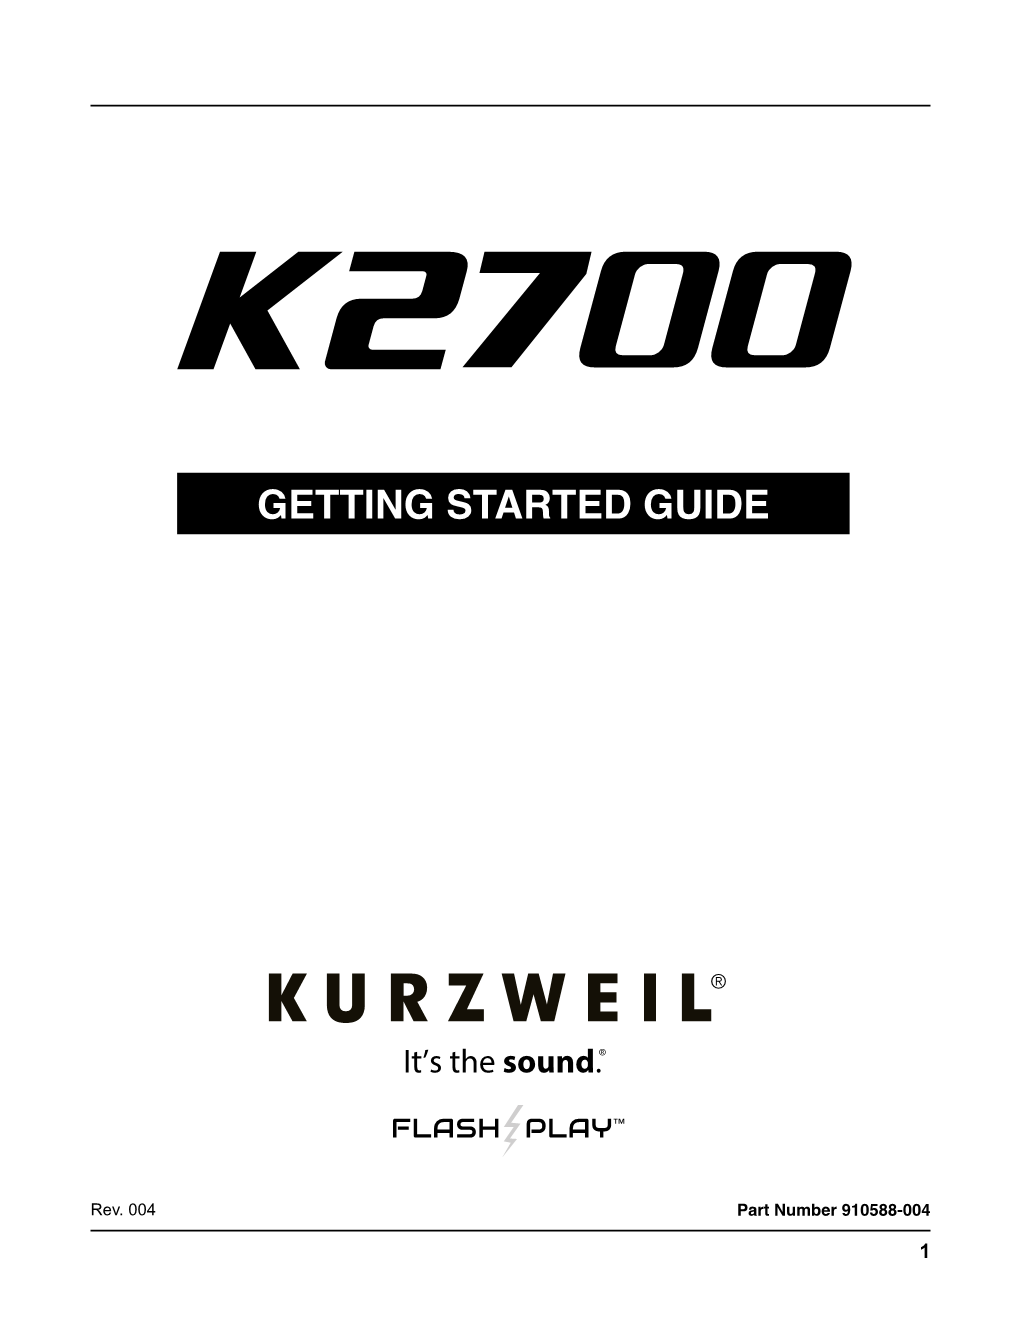 K2700 Getting Started Guide